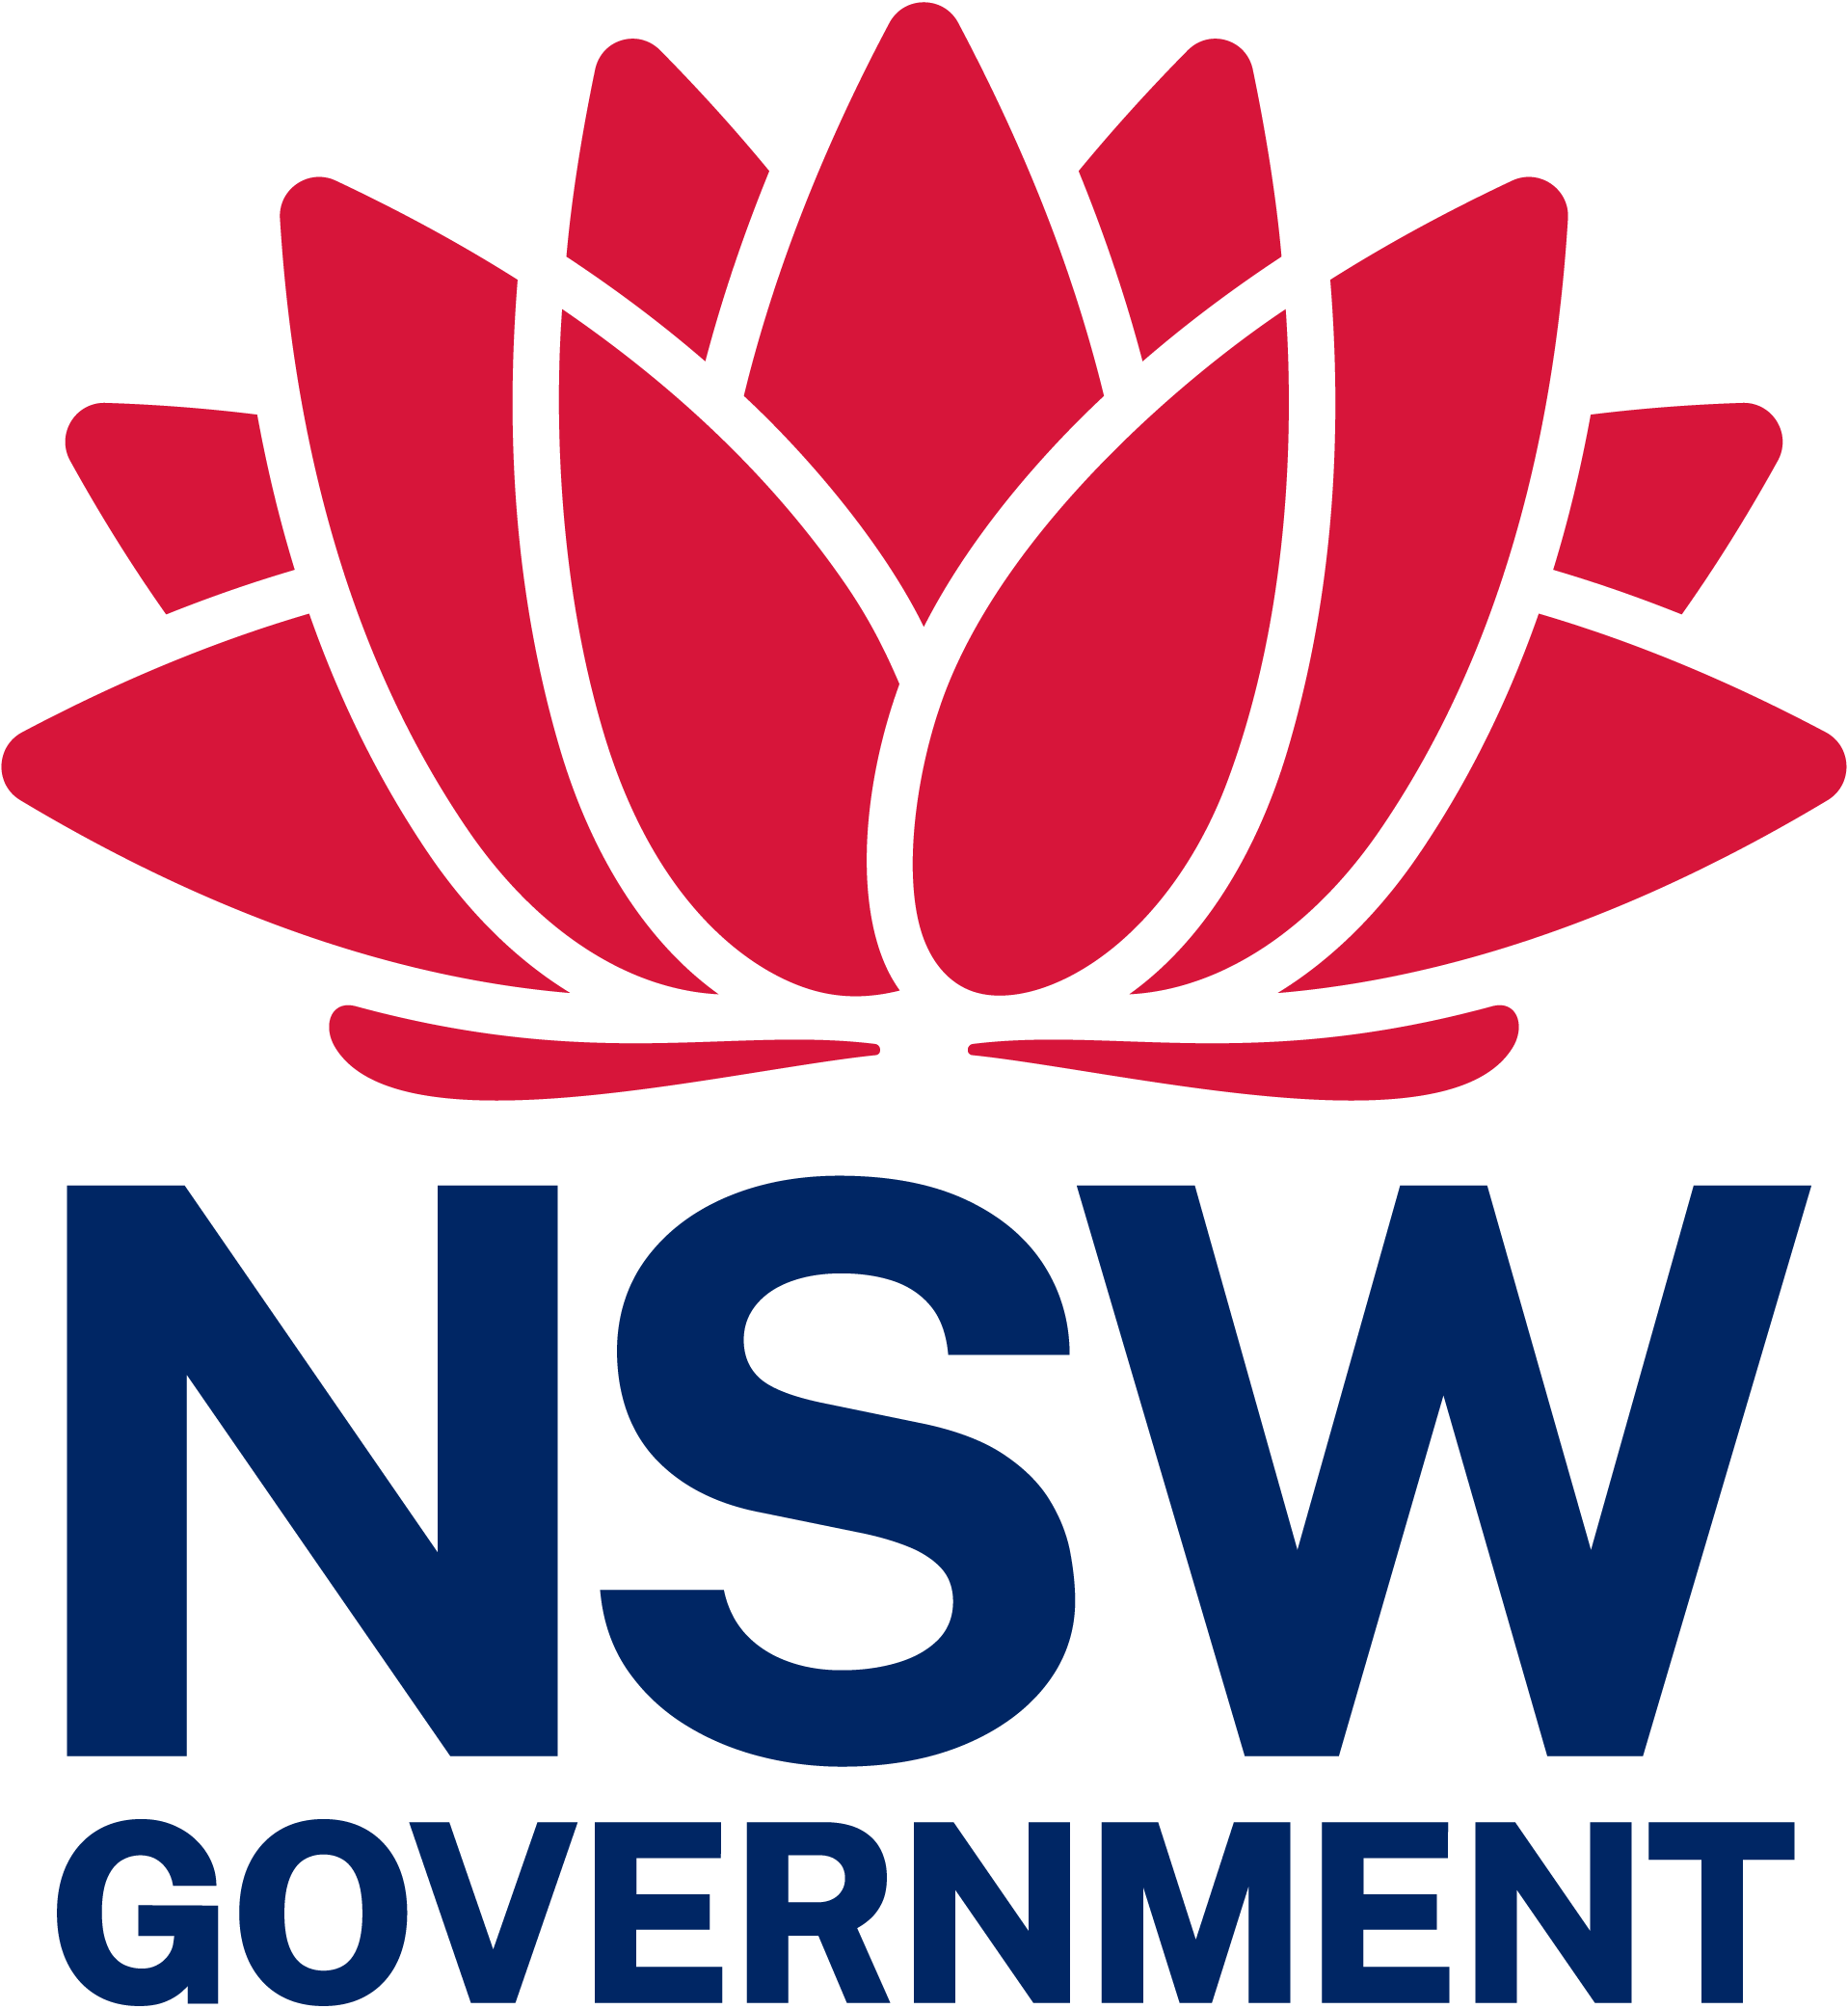 The New South Wales Government logo - a stylised waratah flower with NSW Government printed underneath